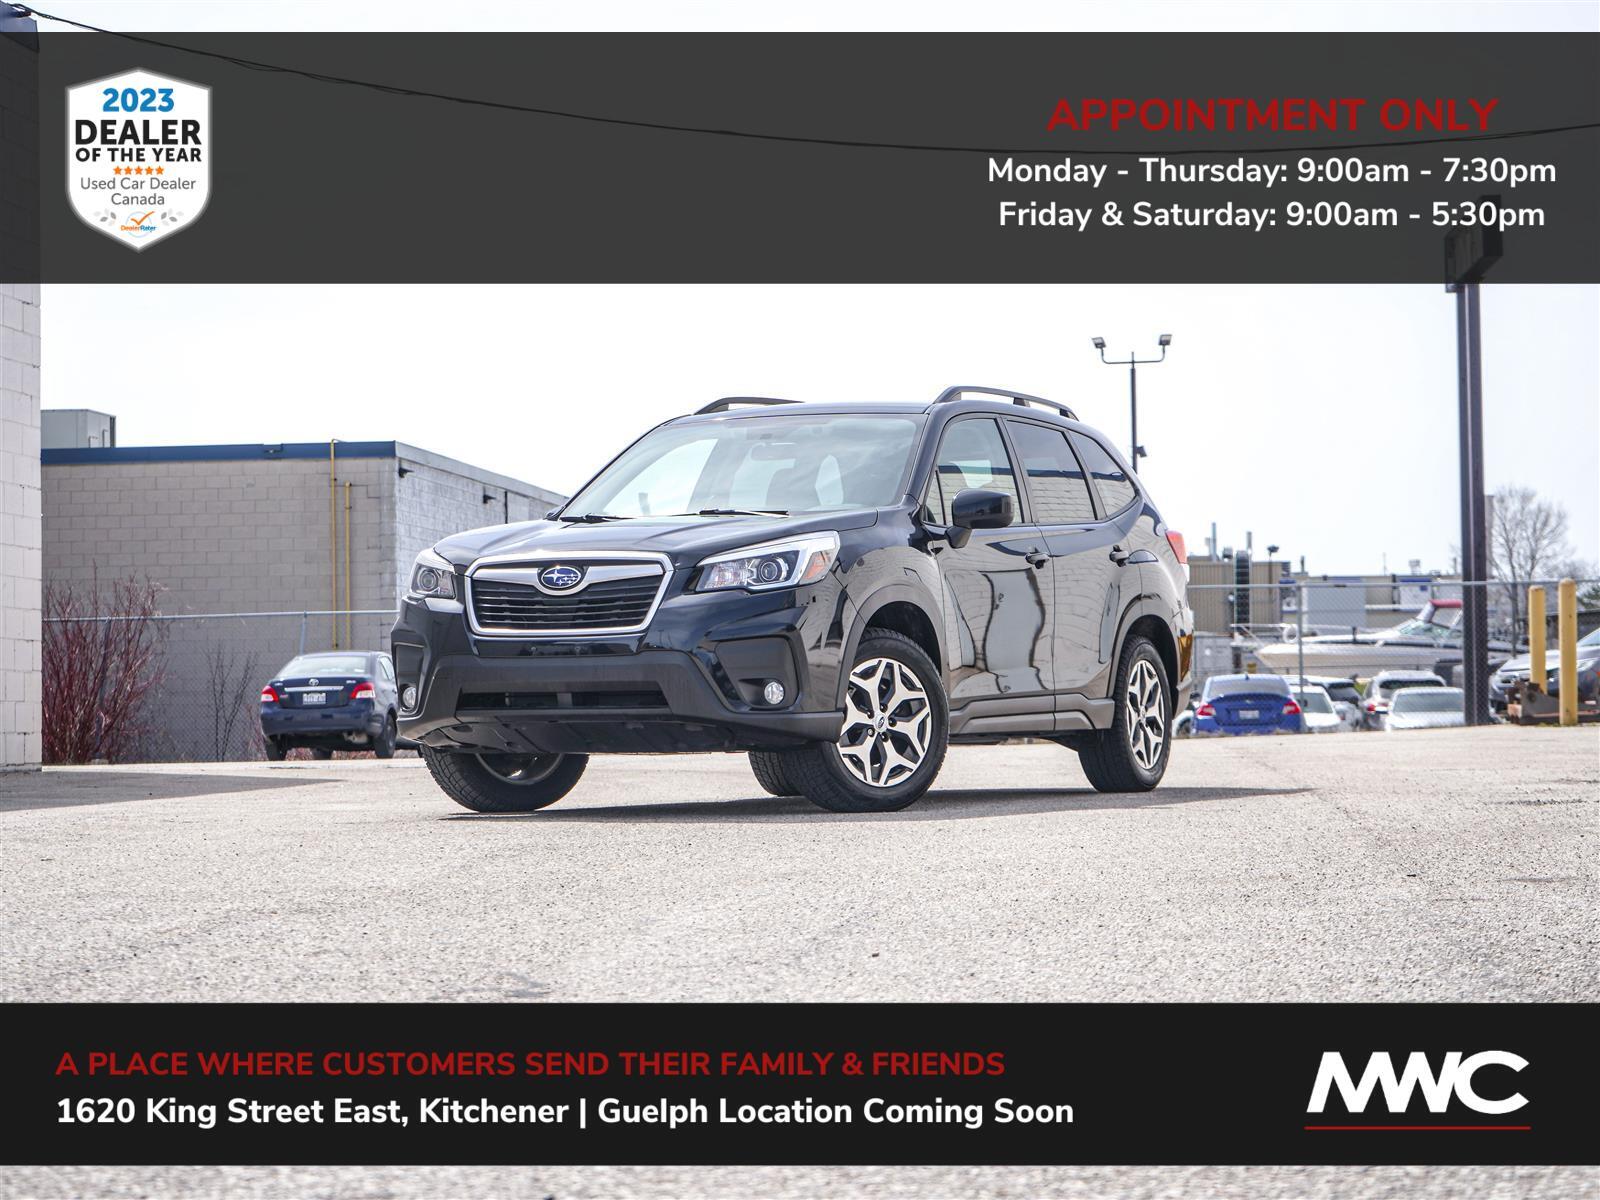 2020 Subaru Forester CONVENIENCE | IN GUELPH, BY APPT. ONLY